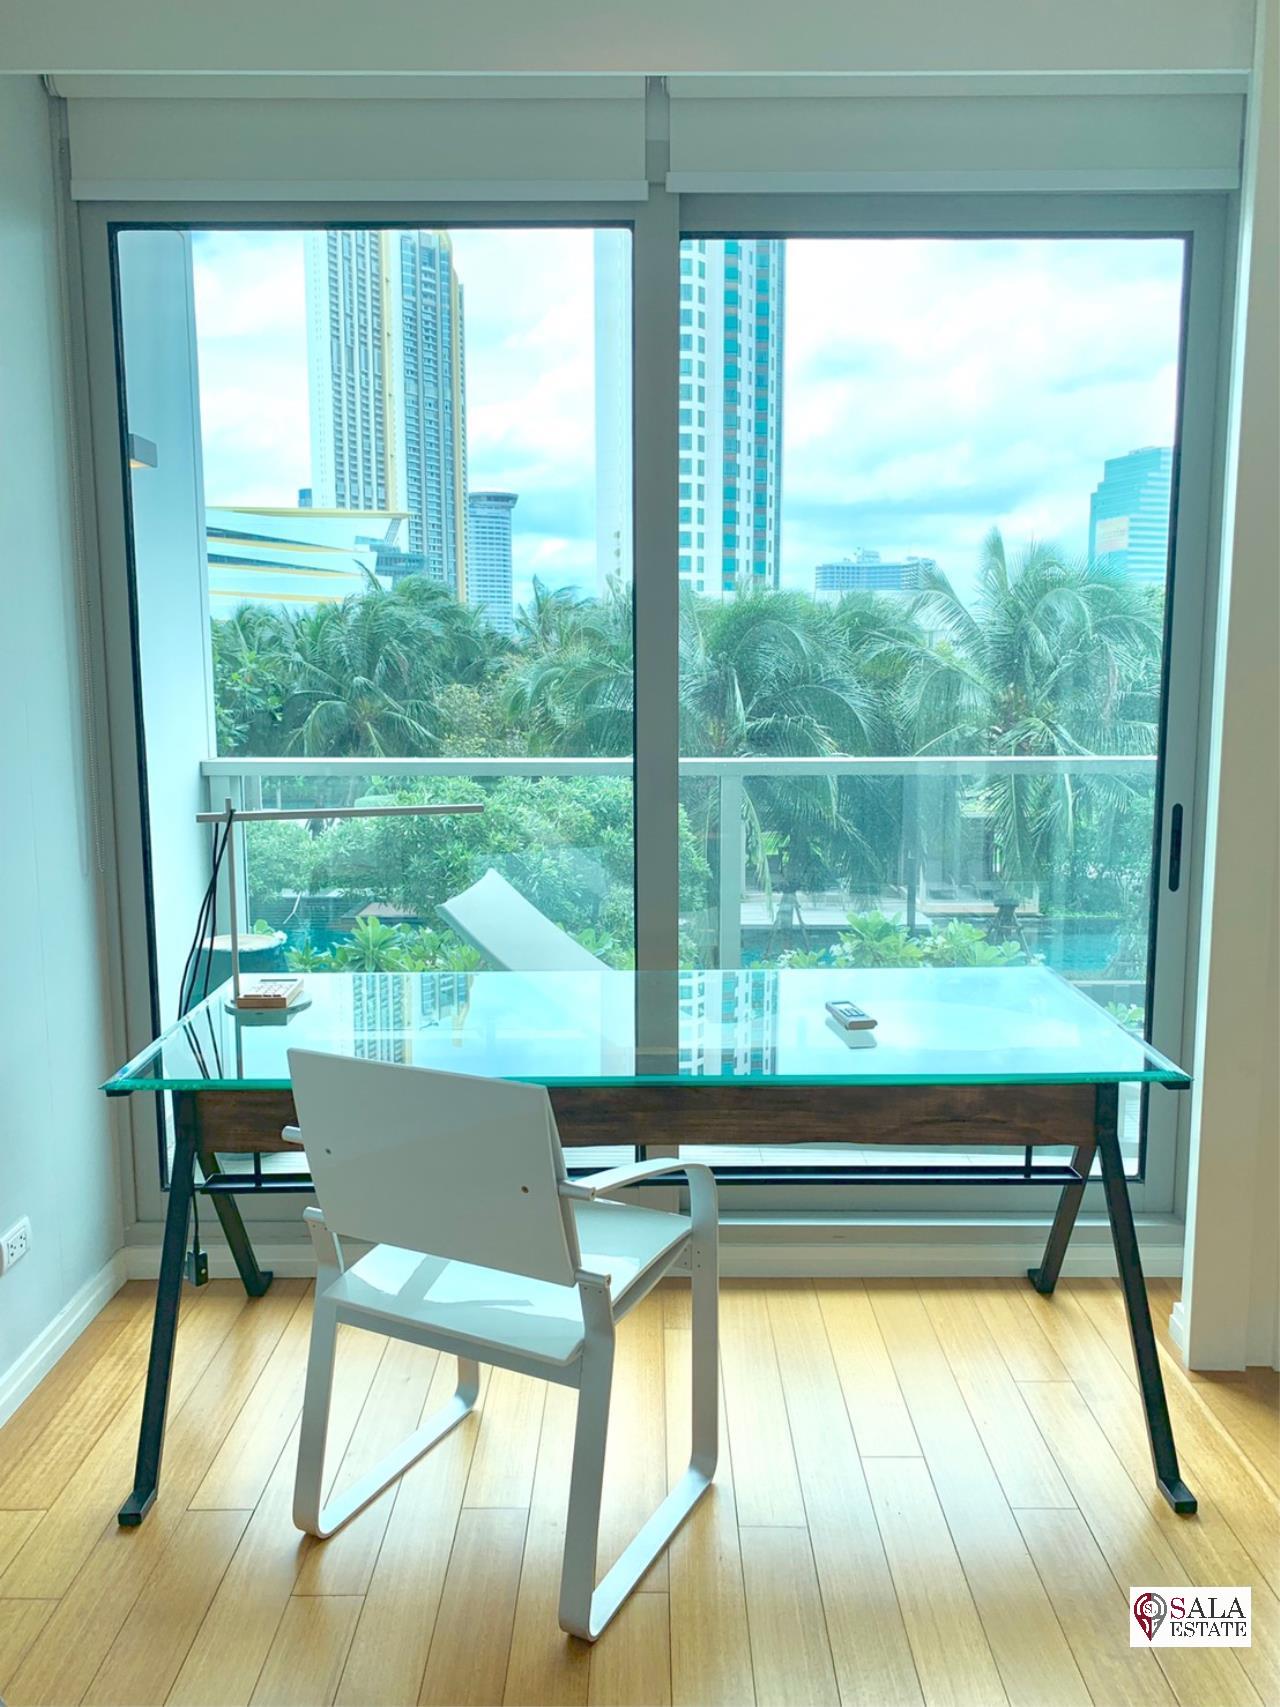 SALA ESTATE Agency's ( FOR RENT ) THE RIVER –RIVERSIDE- NEAR ICONSIAM, 132.22 SQM 2+1 BEDROOMS 2 BATHROOMS WITH FULLY FURNISHED, FREE BOAT TO BTS 3